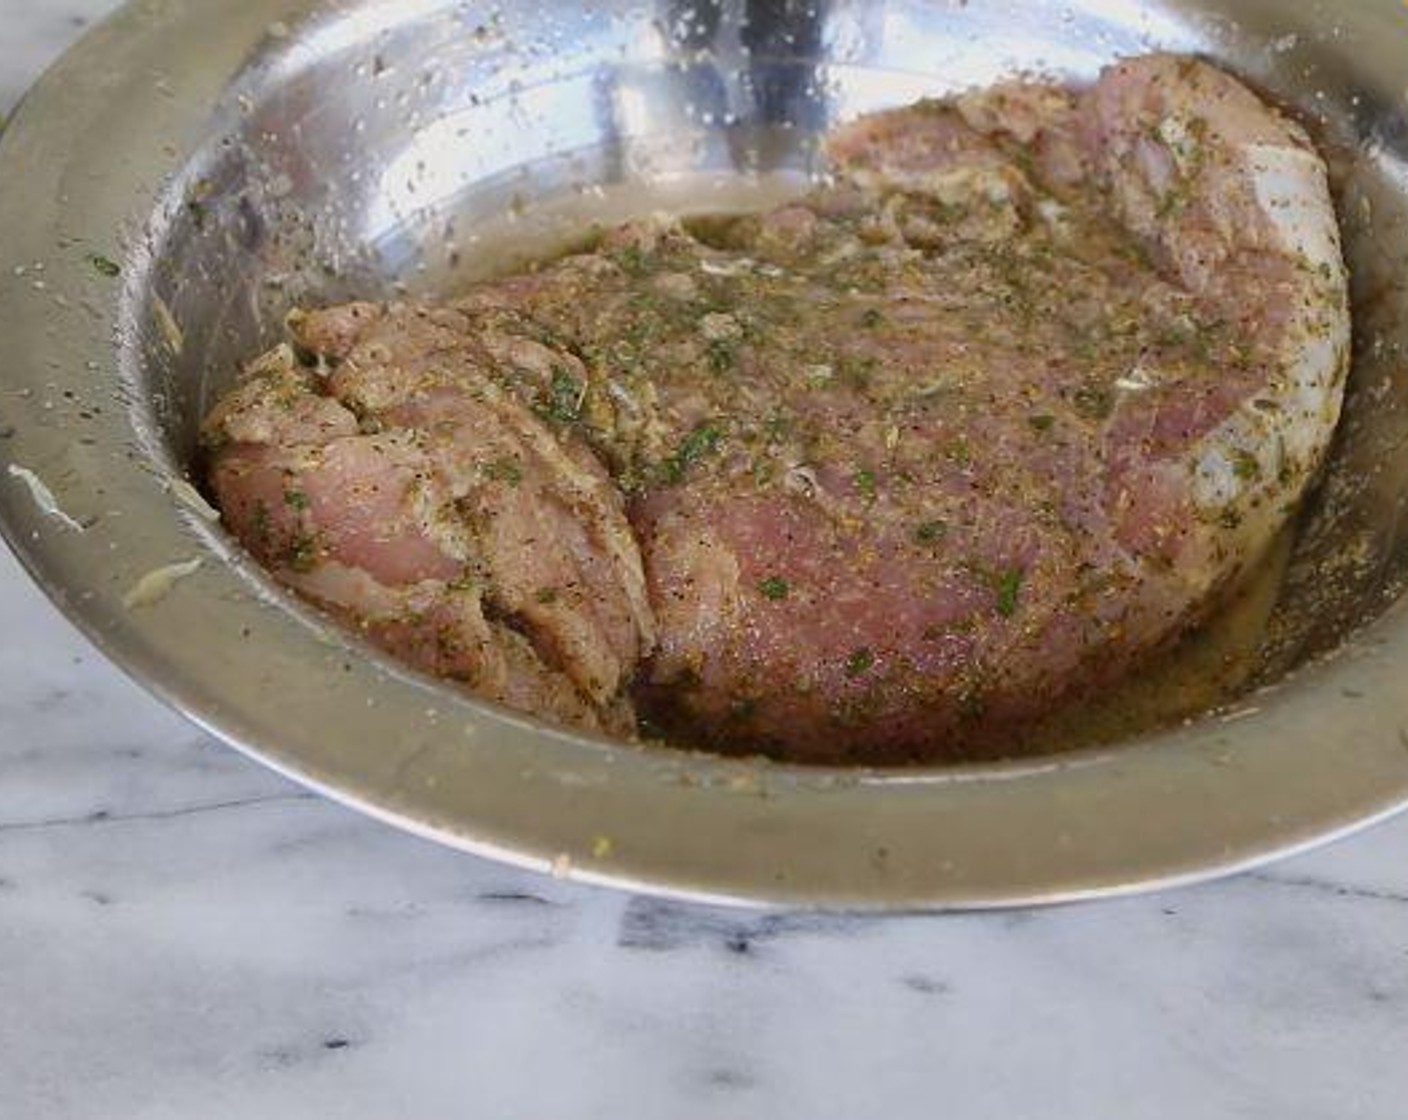 step 1 With a fork, poke some holes into the Pork Tenderloin (1 lb). In a bowl, place the pork and add the McCormick® Garlic Powder (1 tsp), Onion Powder (1 tsp), Dried Oregano (1 tsp), Salt (1/2 Tbsp), Ground Black Pepper (to taste), Dried Parsley (1 tsp), Dried Thyme (1/2 tsp), the juice from the Lime (1) and Sunkist Orange (1). Cover and let marinate in the fridge for at least 30 minutes.